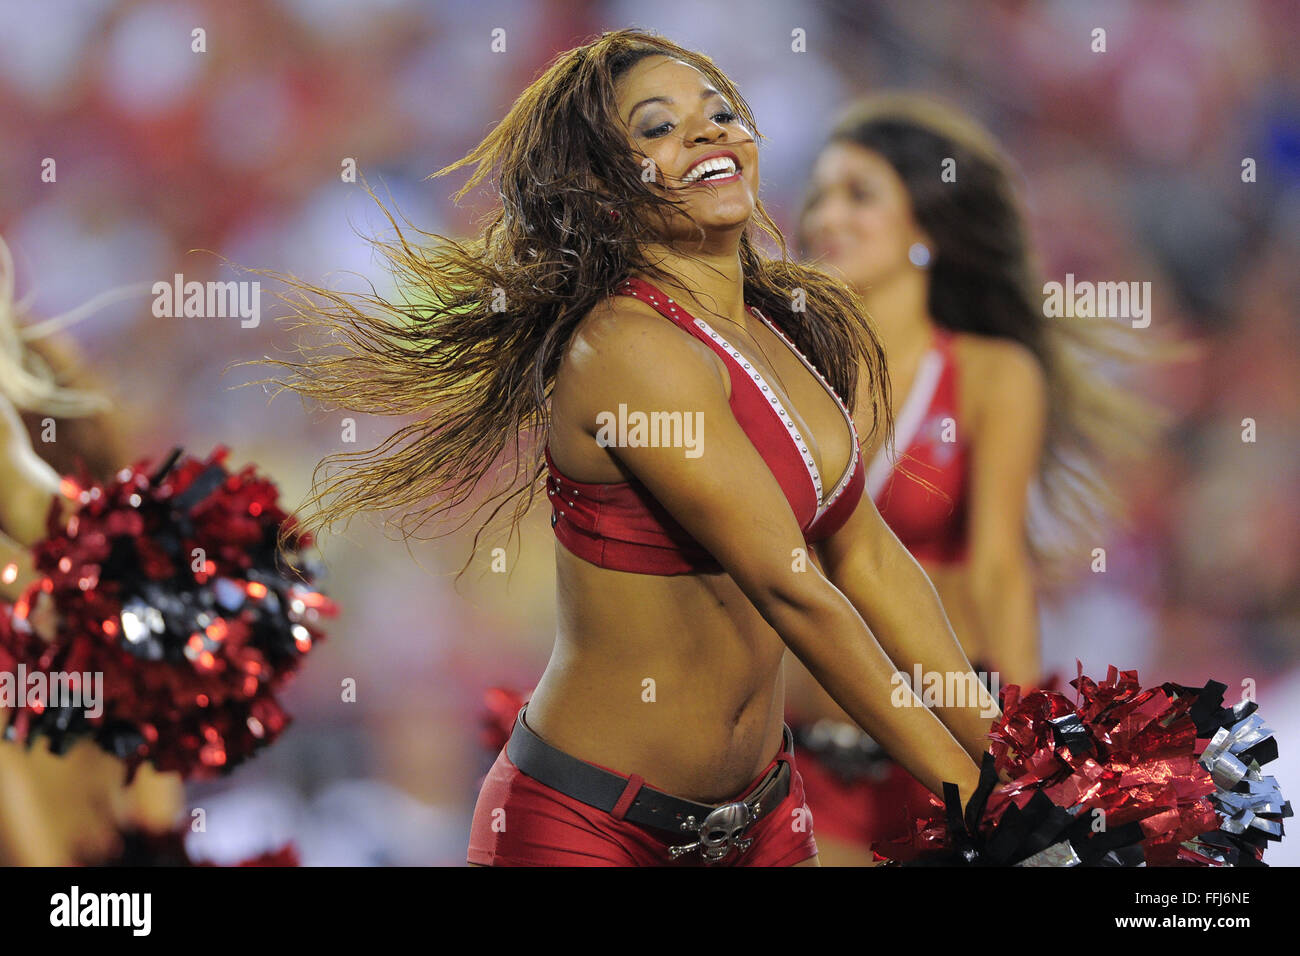 Tampa, FL, USA. 15th Sep, 2013. Tampa Bay Buccaneers cheerleaders during the Bucs game against the New Orleans Saints at Raymond James Stadium on Sept. 15, 2013 in Tampa, Florida. ZUMA PRESS/ Scott A. Miller © Scott A. Miller/ZUMA Wire/Alamy Live News Stock Photo